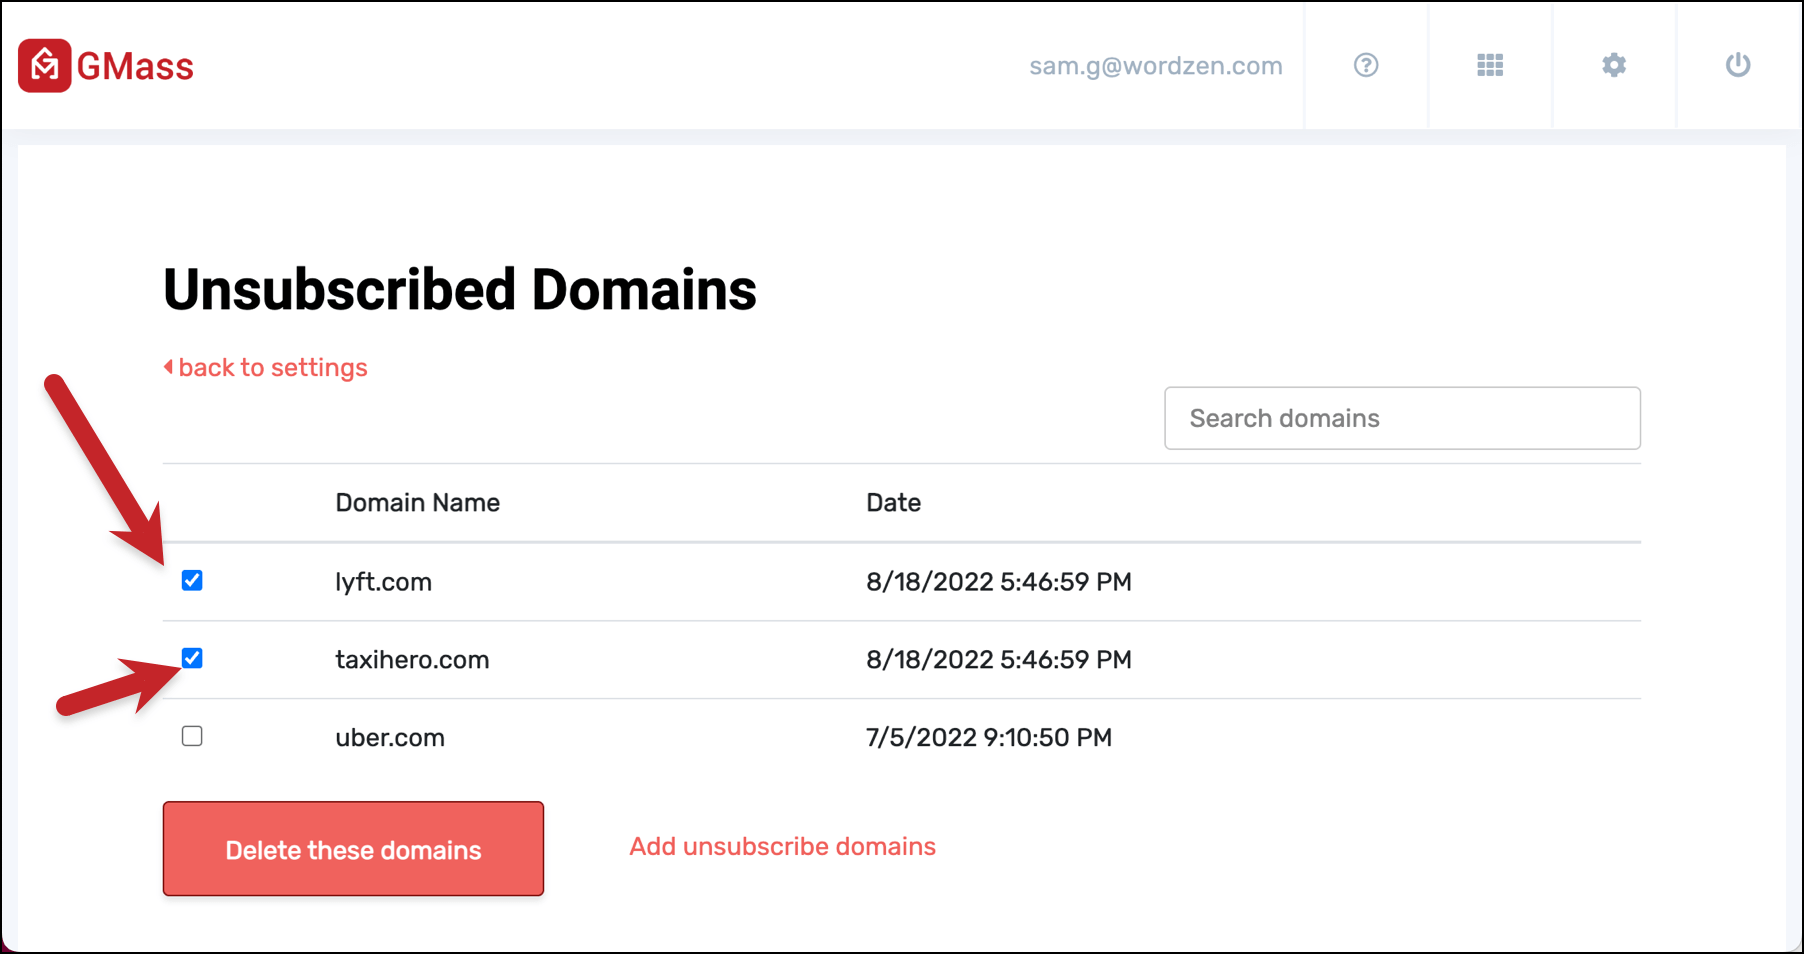 Resubscribe a domain by checking the boxes